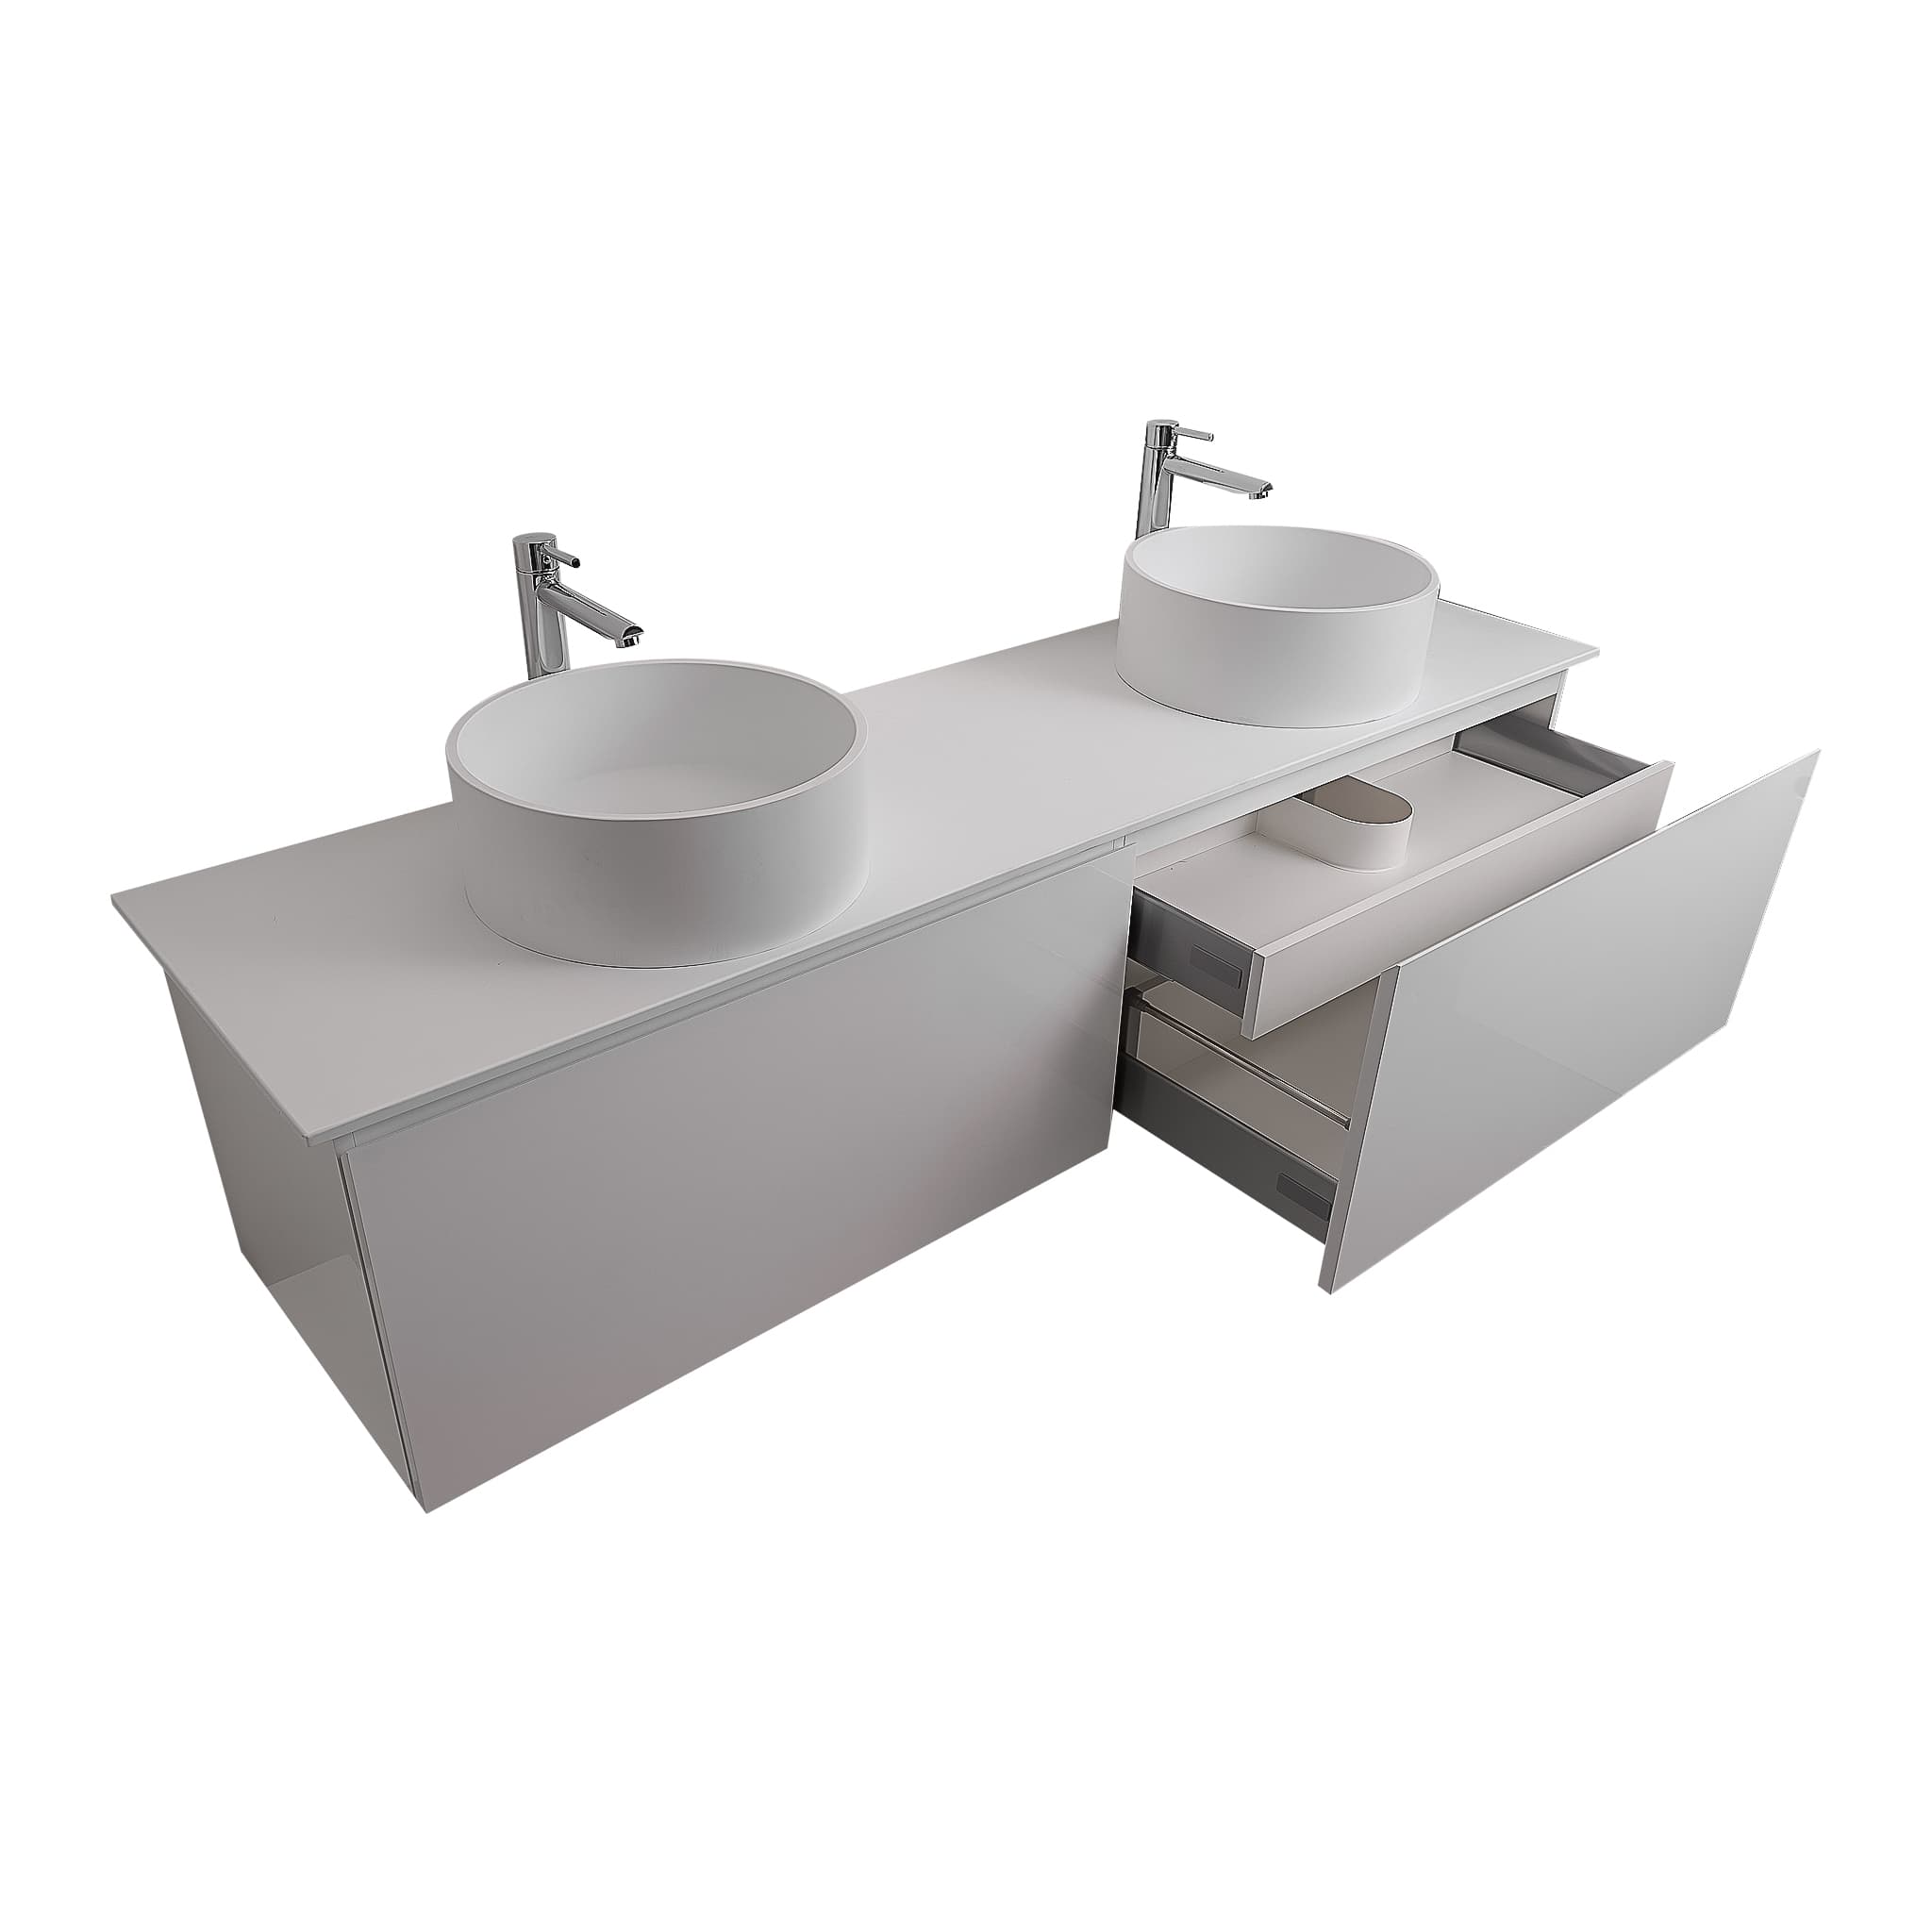 Venice 63 White High Gloss Cabinet, Solid Surface Flat White Counter And Two Round Solid Surface White Basin 1386, Wall Mounted Modern Vanity Set